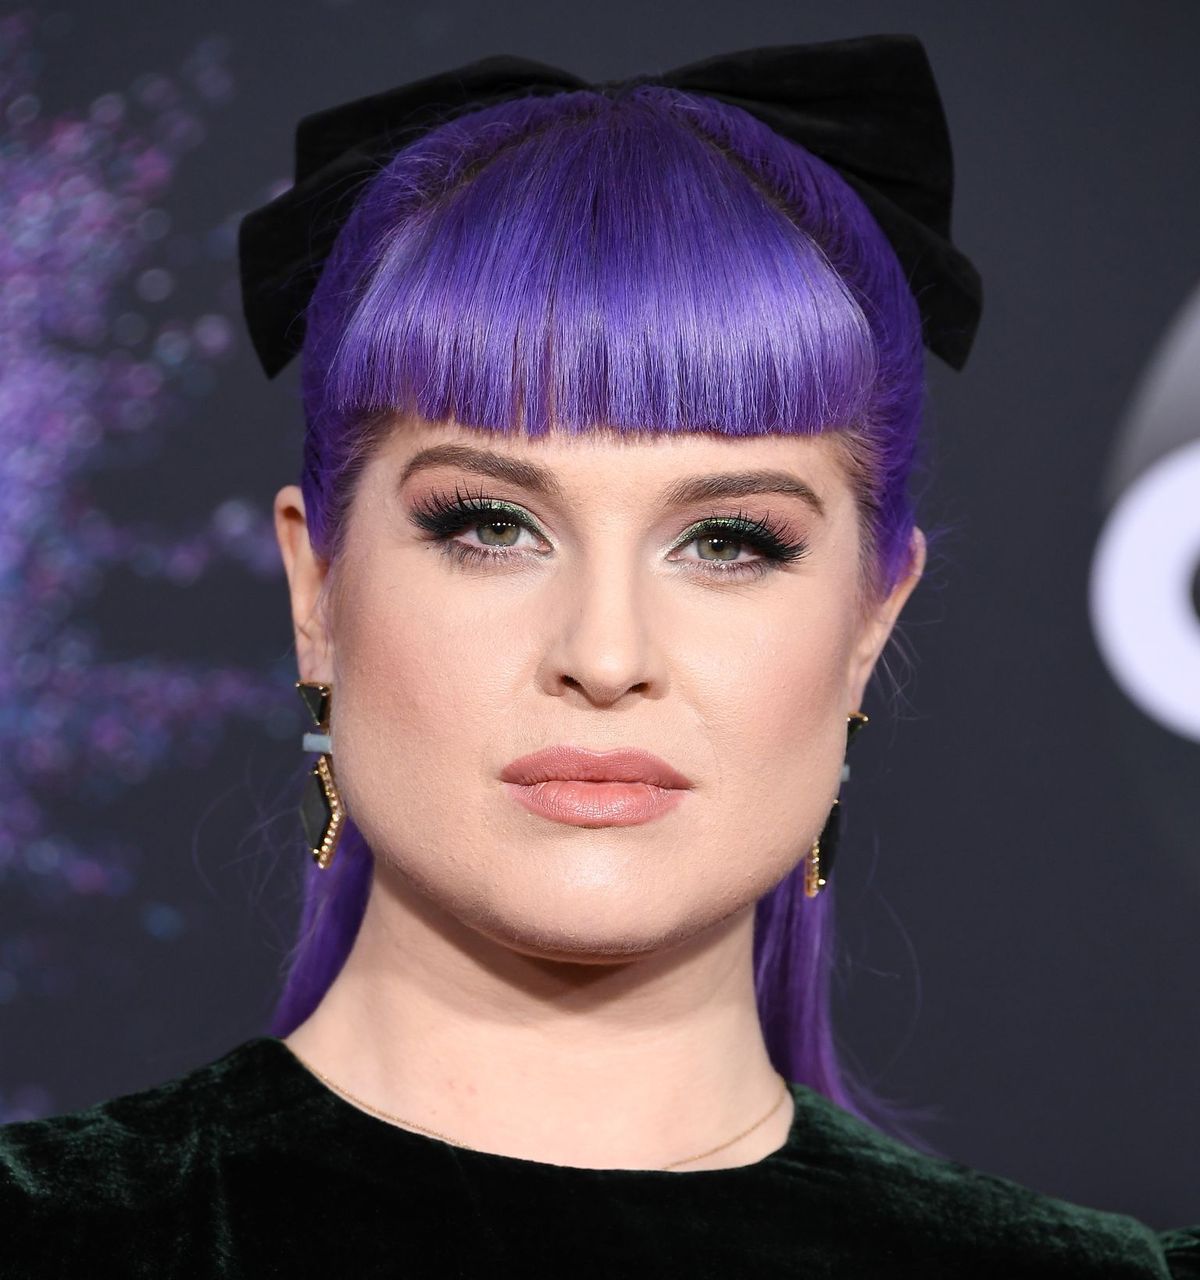 Kelly Osbourne at the 2019 American Music Awards  on November 24, 2019 in LA | Getty Images